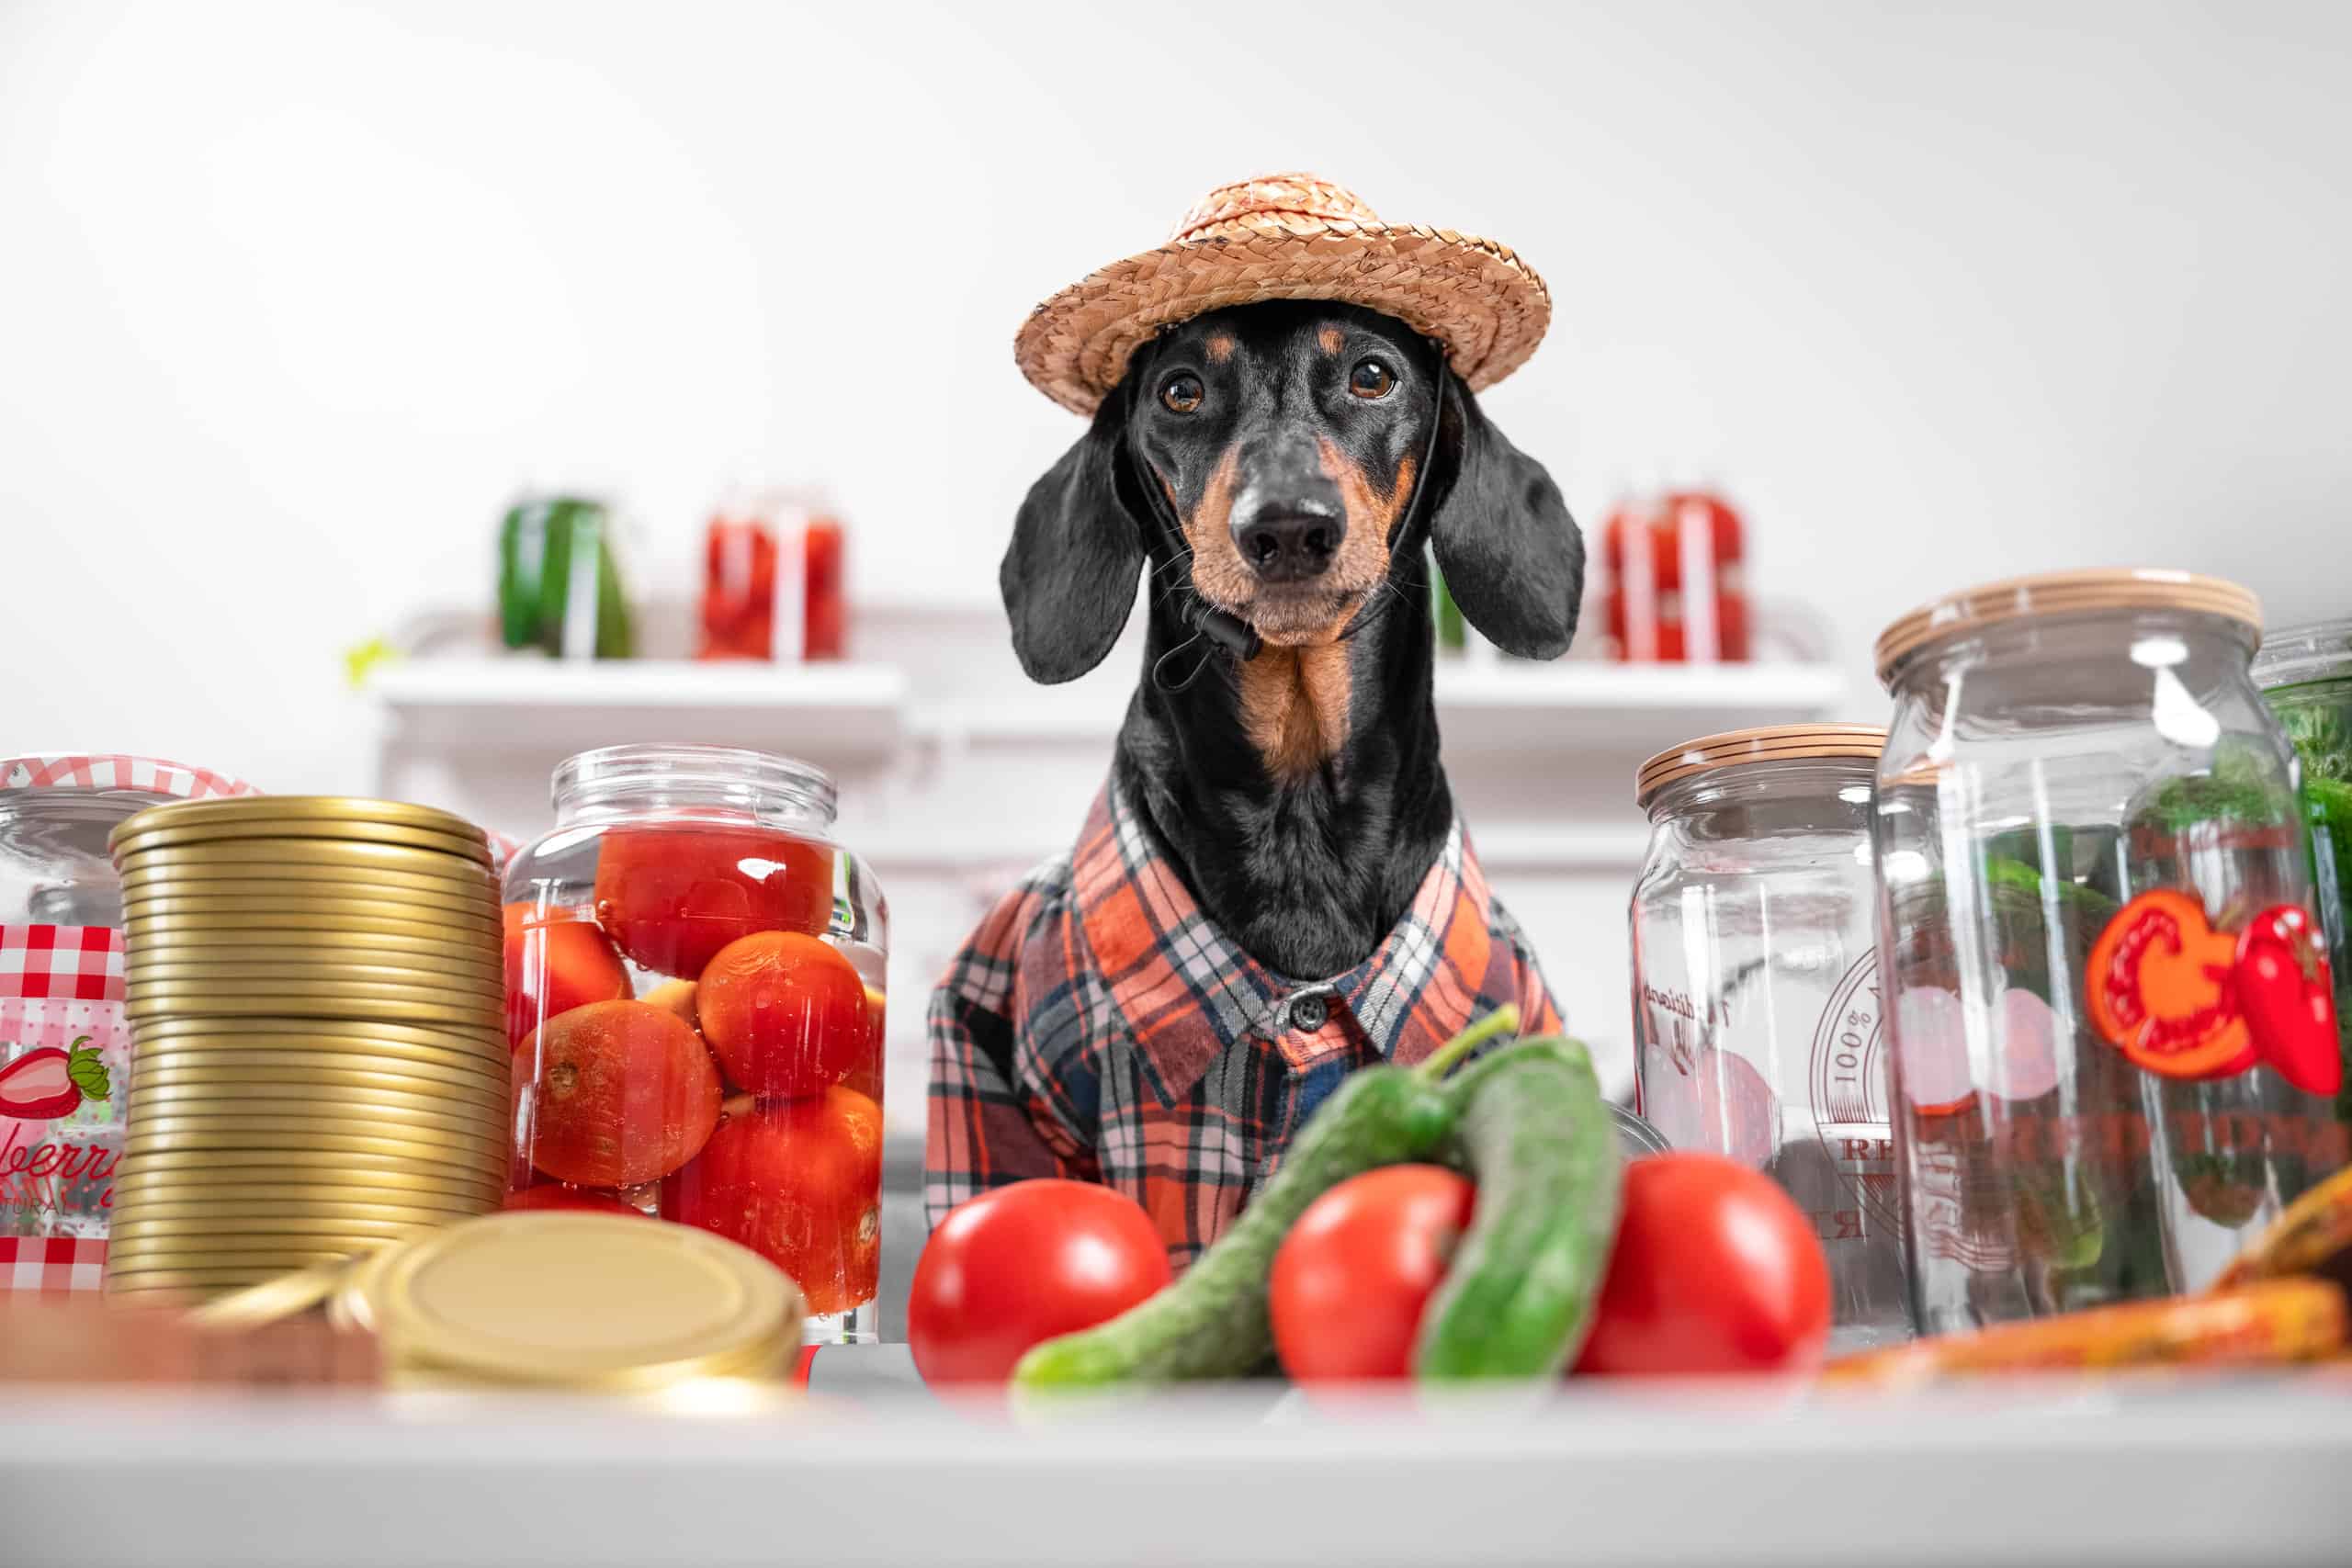 Can Dogs Eat Pickles Safely? It Depends - AZ Animals